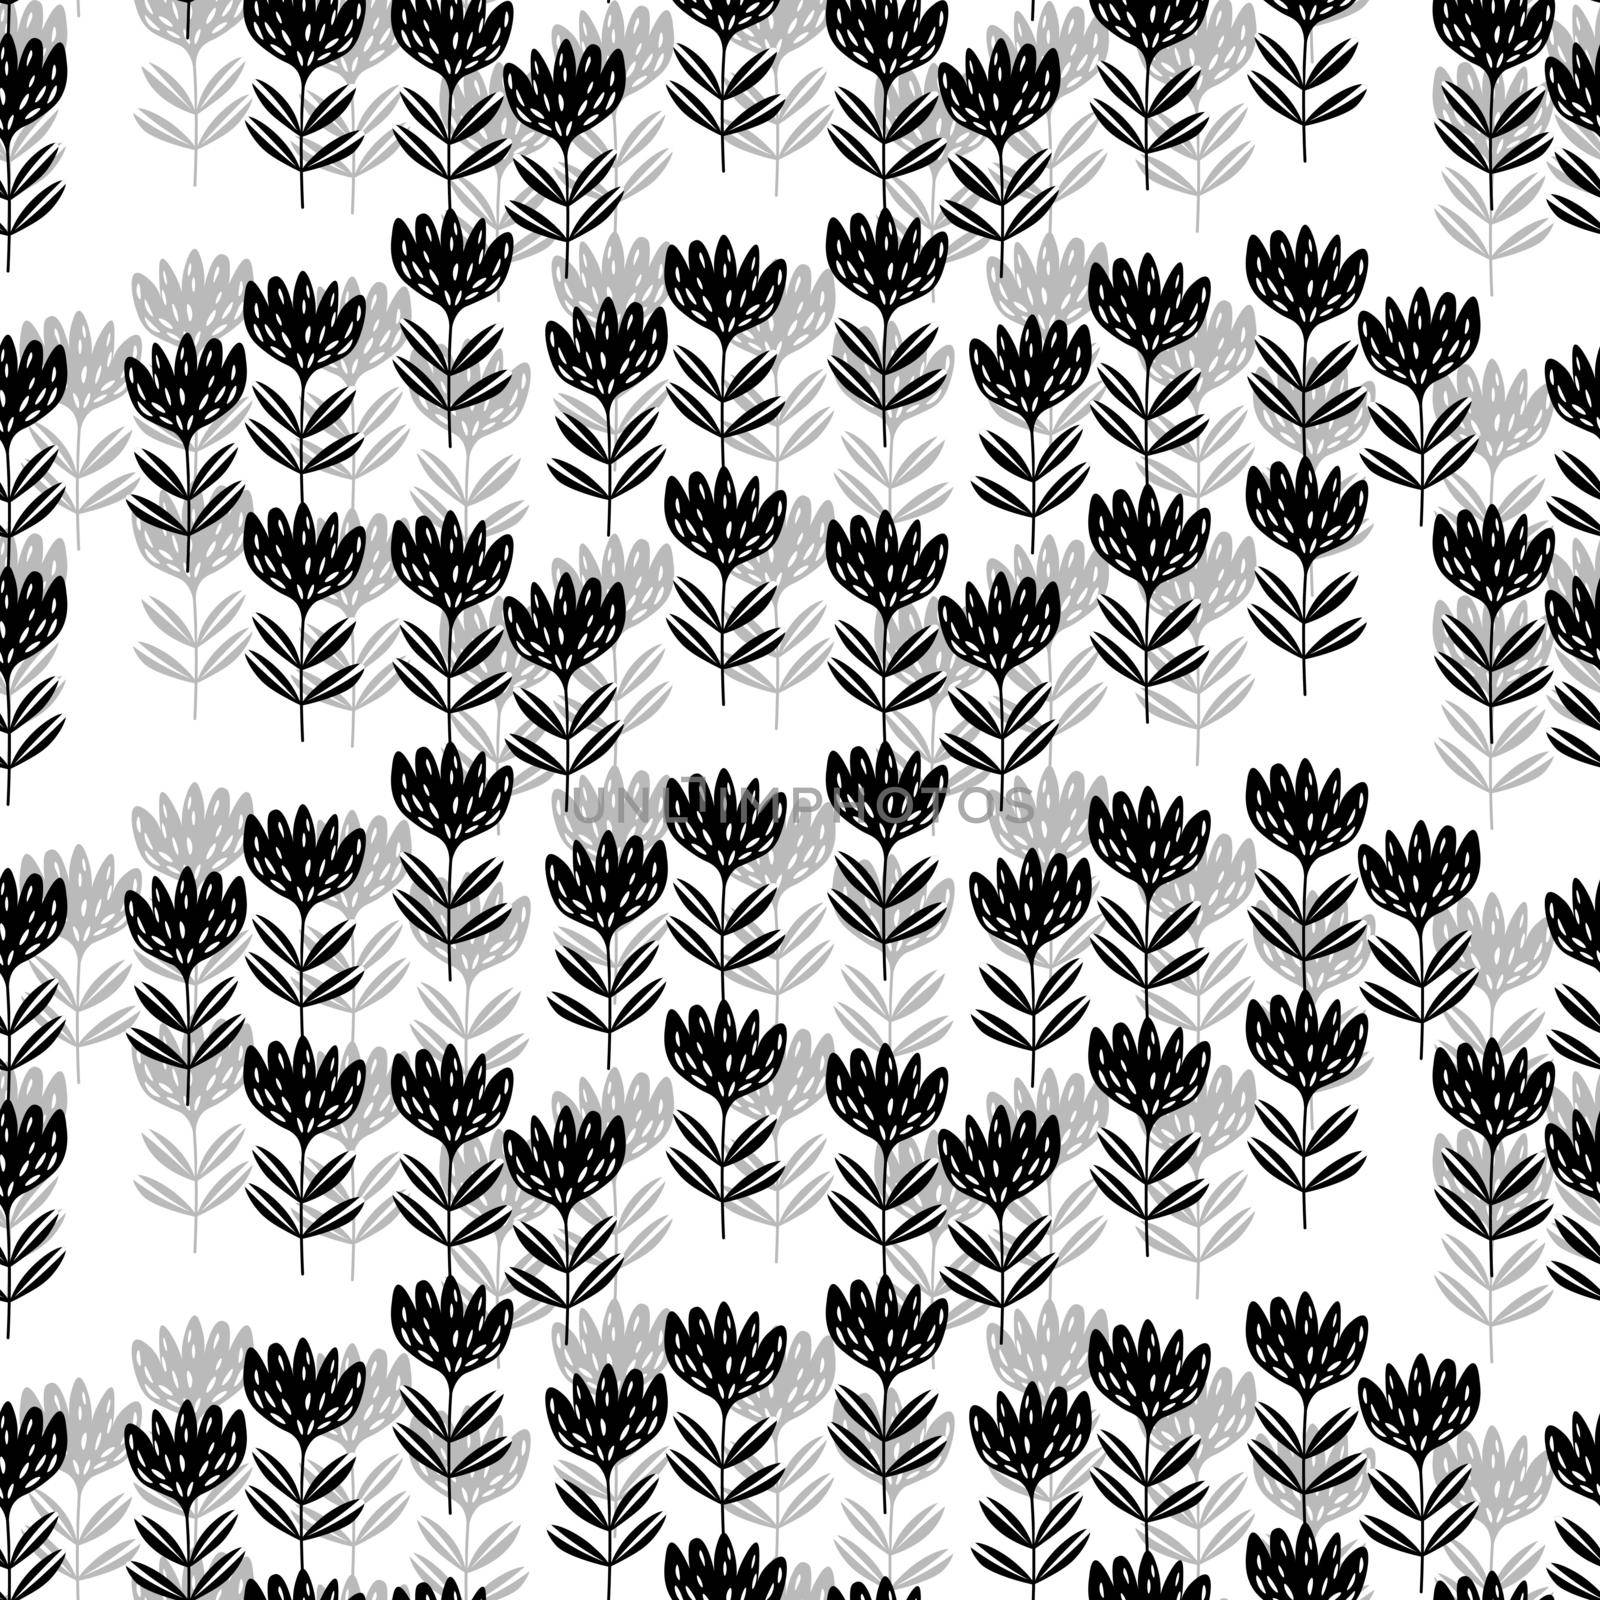 Seamless floral pattern based on traditional folk art ornaments. Black flowers on white background. Scandinavian style. Sweden nordic style. Vector illustration for fabric, textile, wallpaper